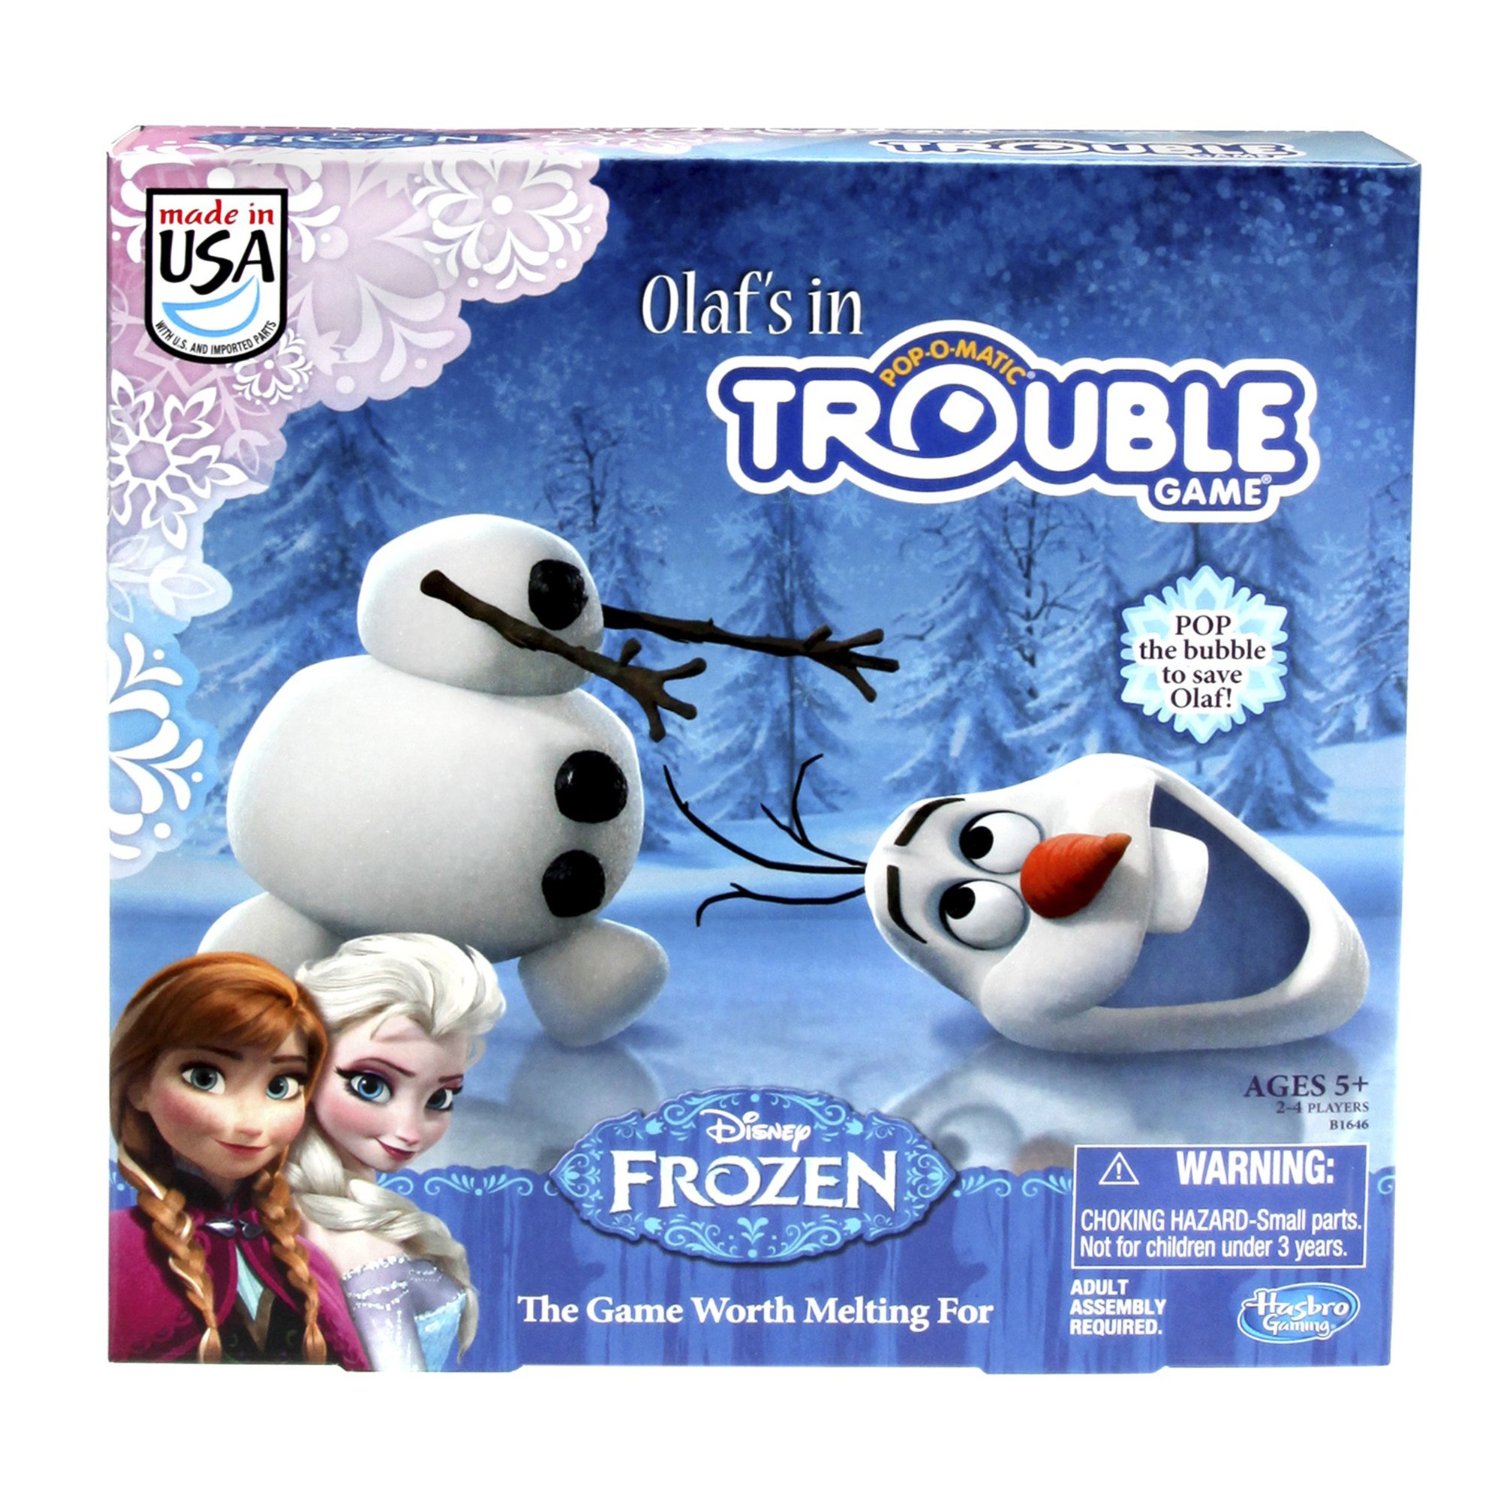 Frozen Olaf’s in Trouble Game Only $11.99 – Reg $16.99